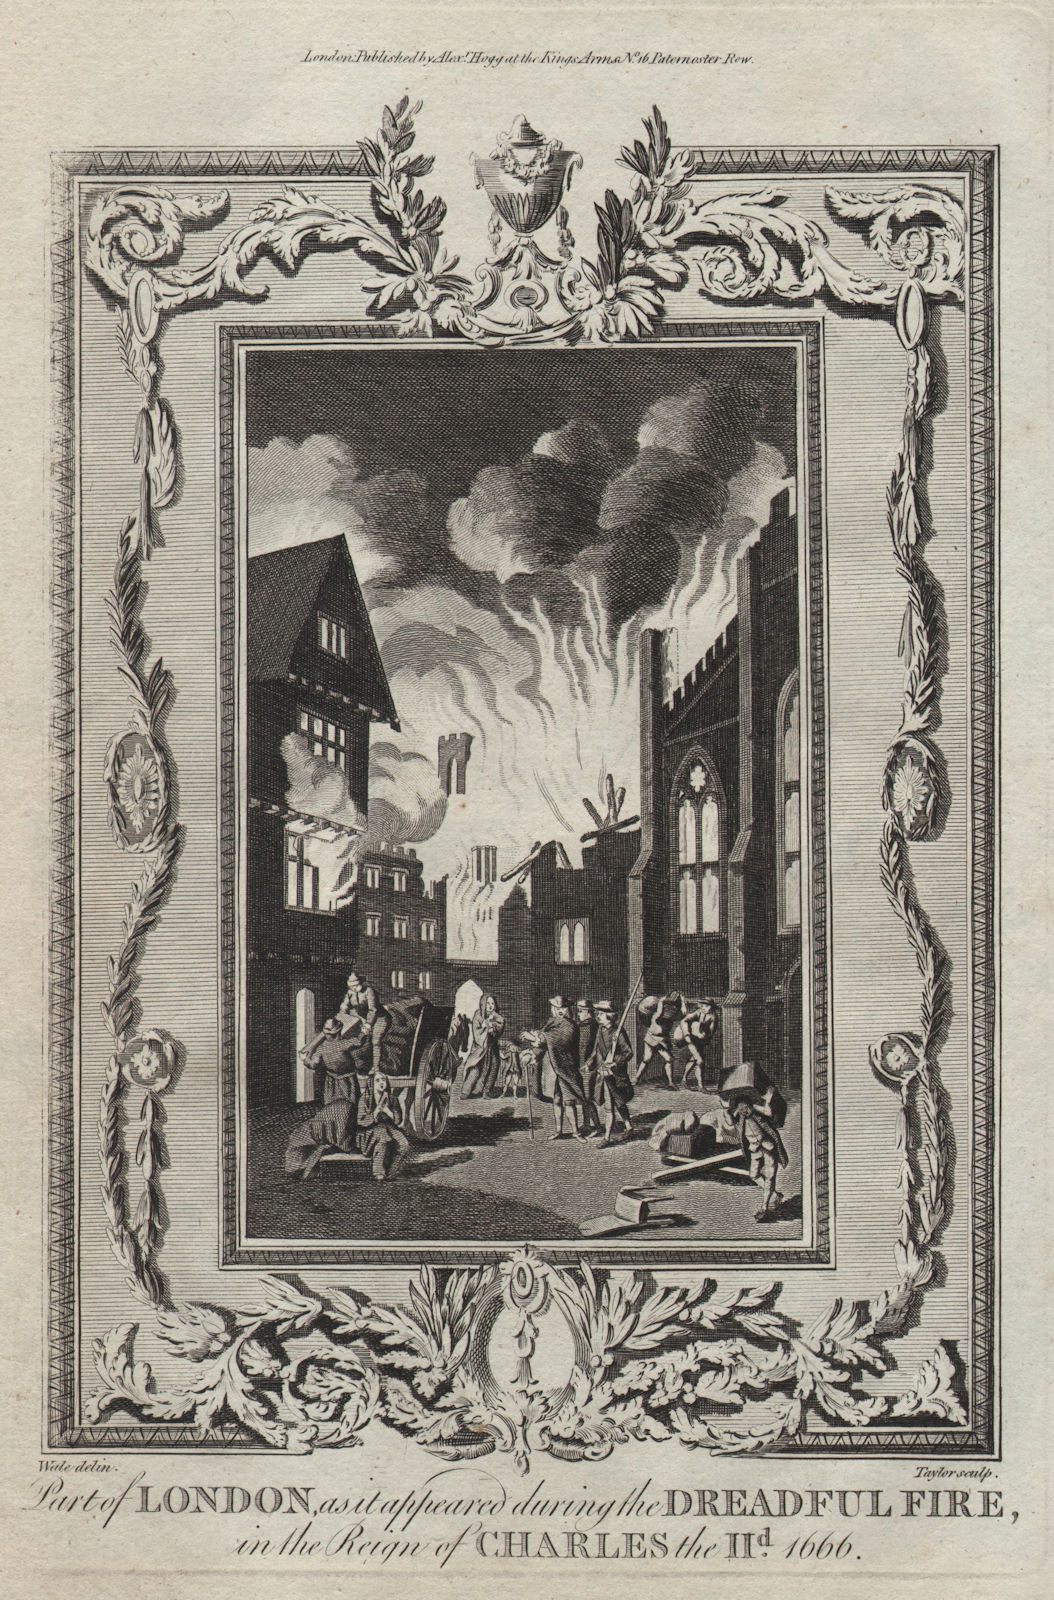 Part of London, as it appeared in the dreadful Great Fire of 1666. THORNTON 1784